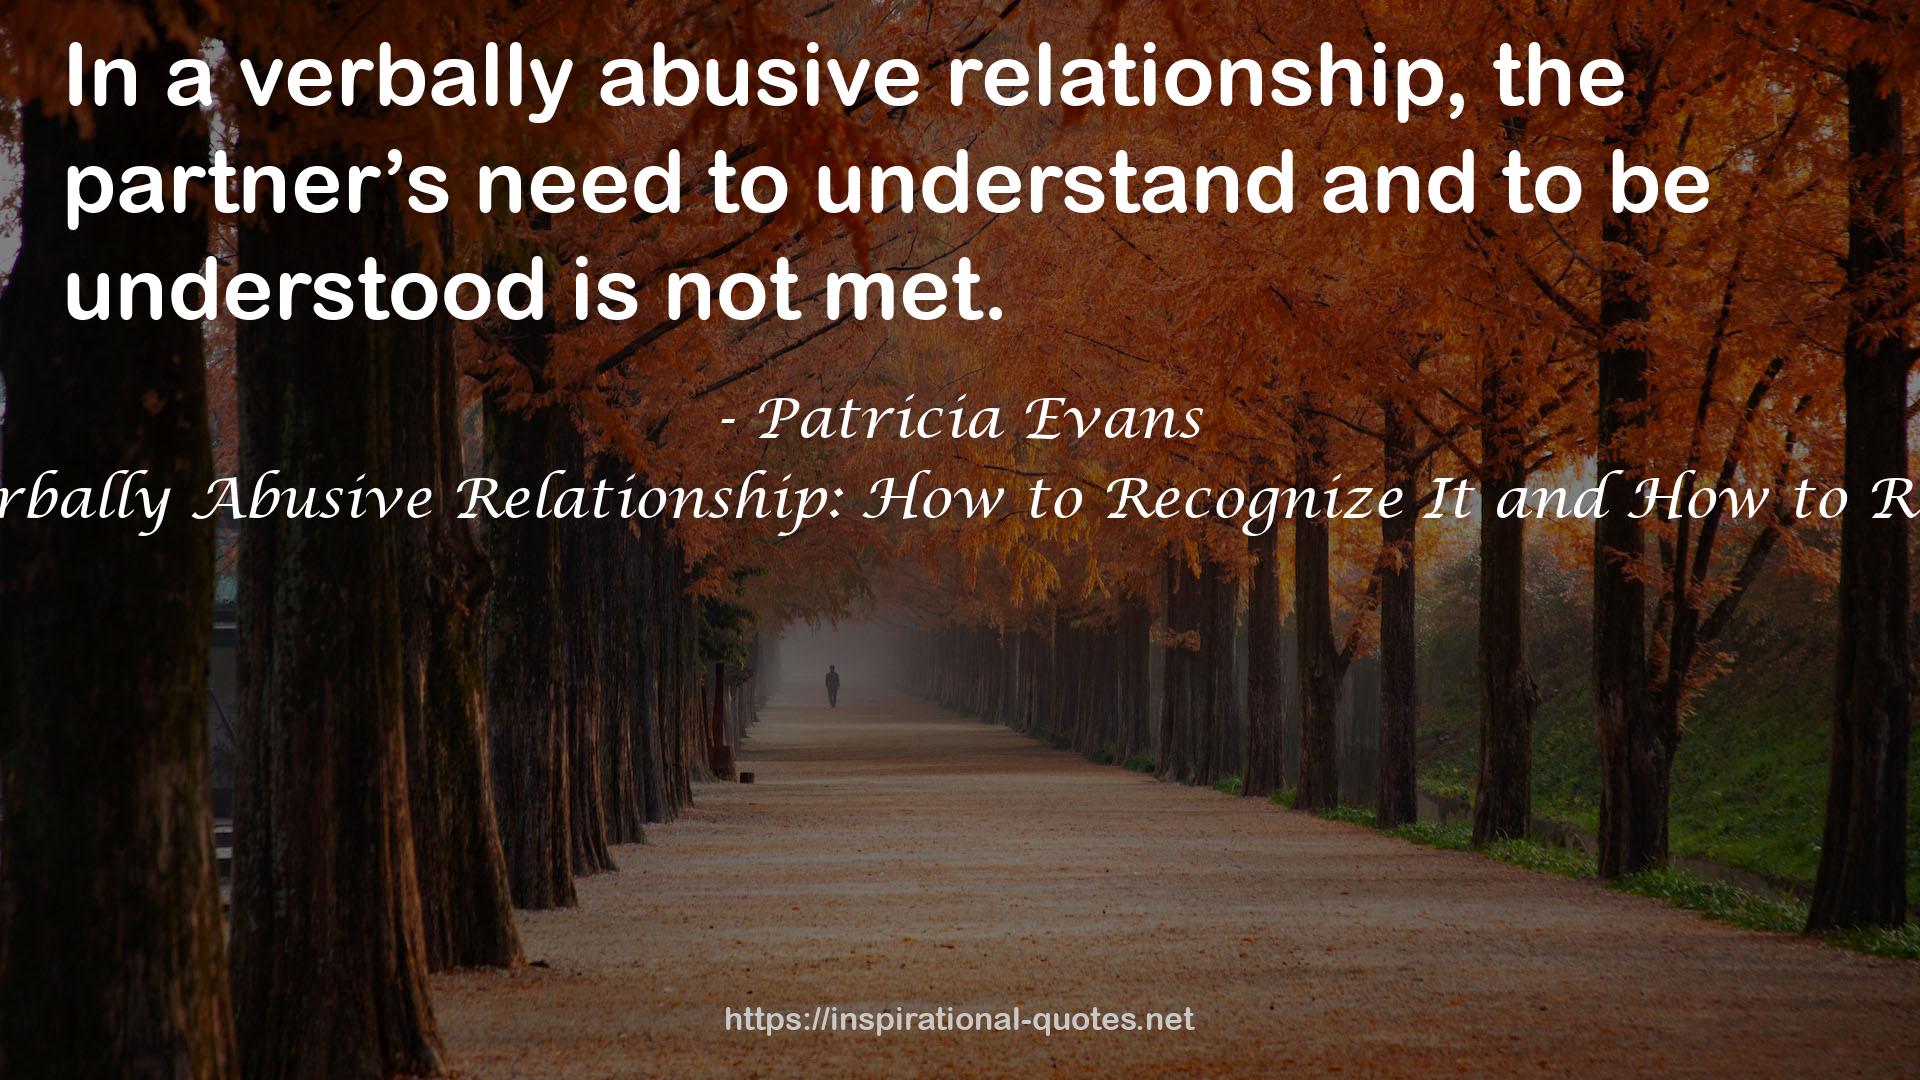 The Verbally Abusive Relationship: How to Recognize It and How to Respond QUOTES